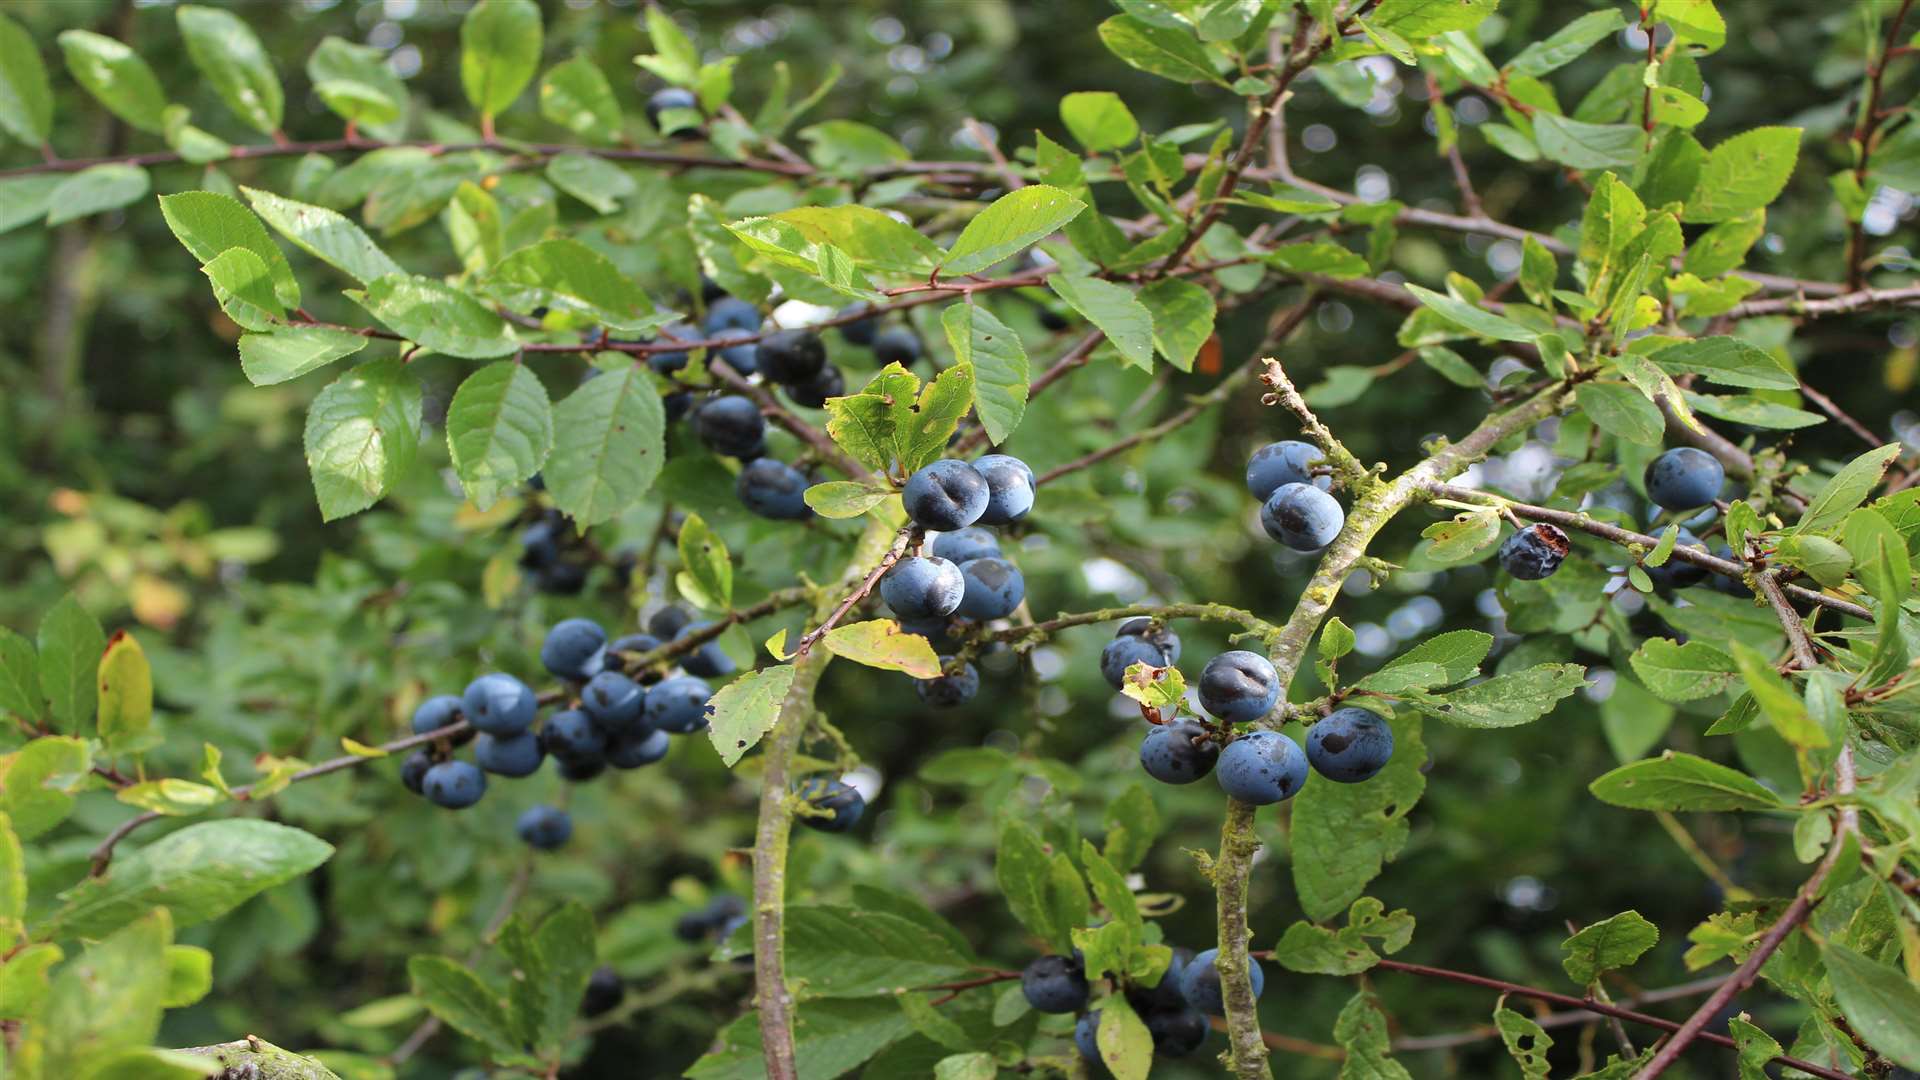 Sloes on the blackthorn